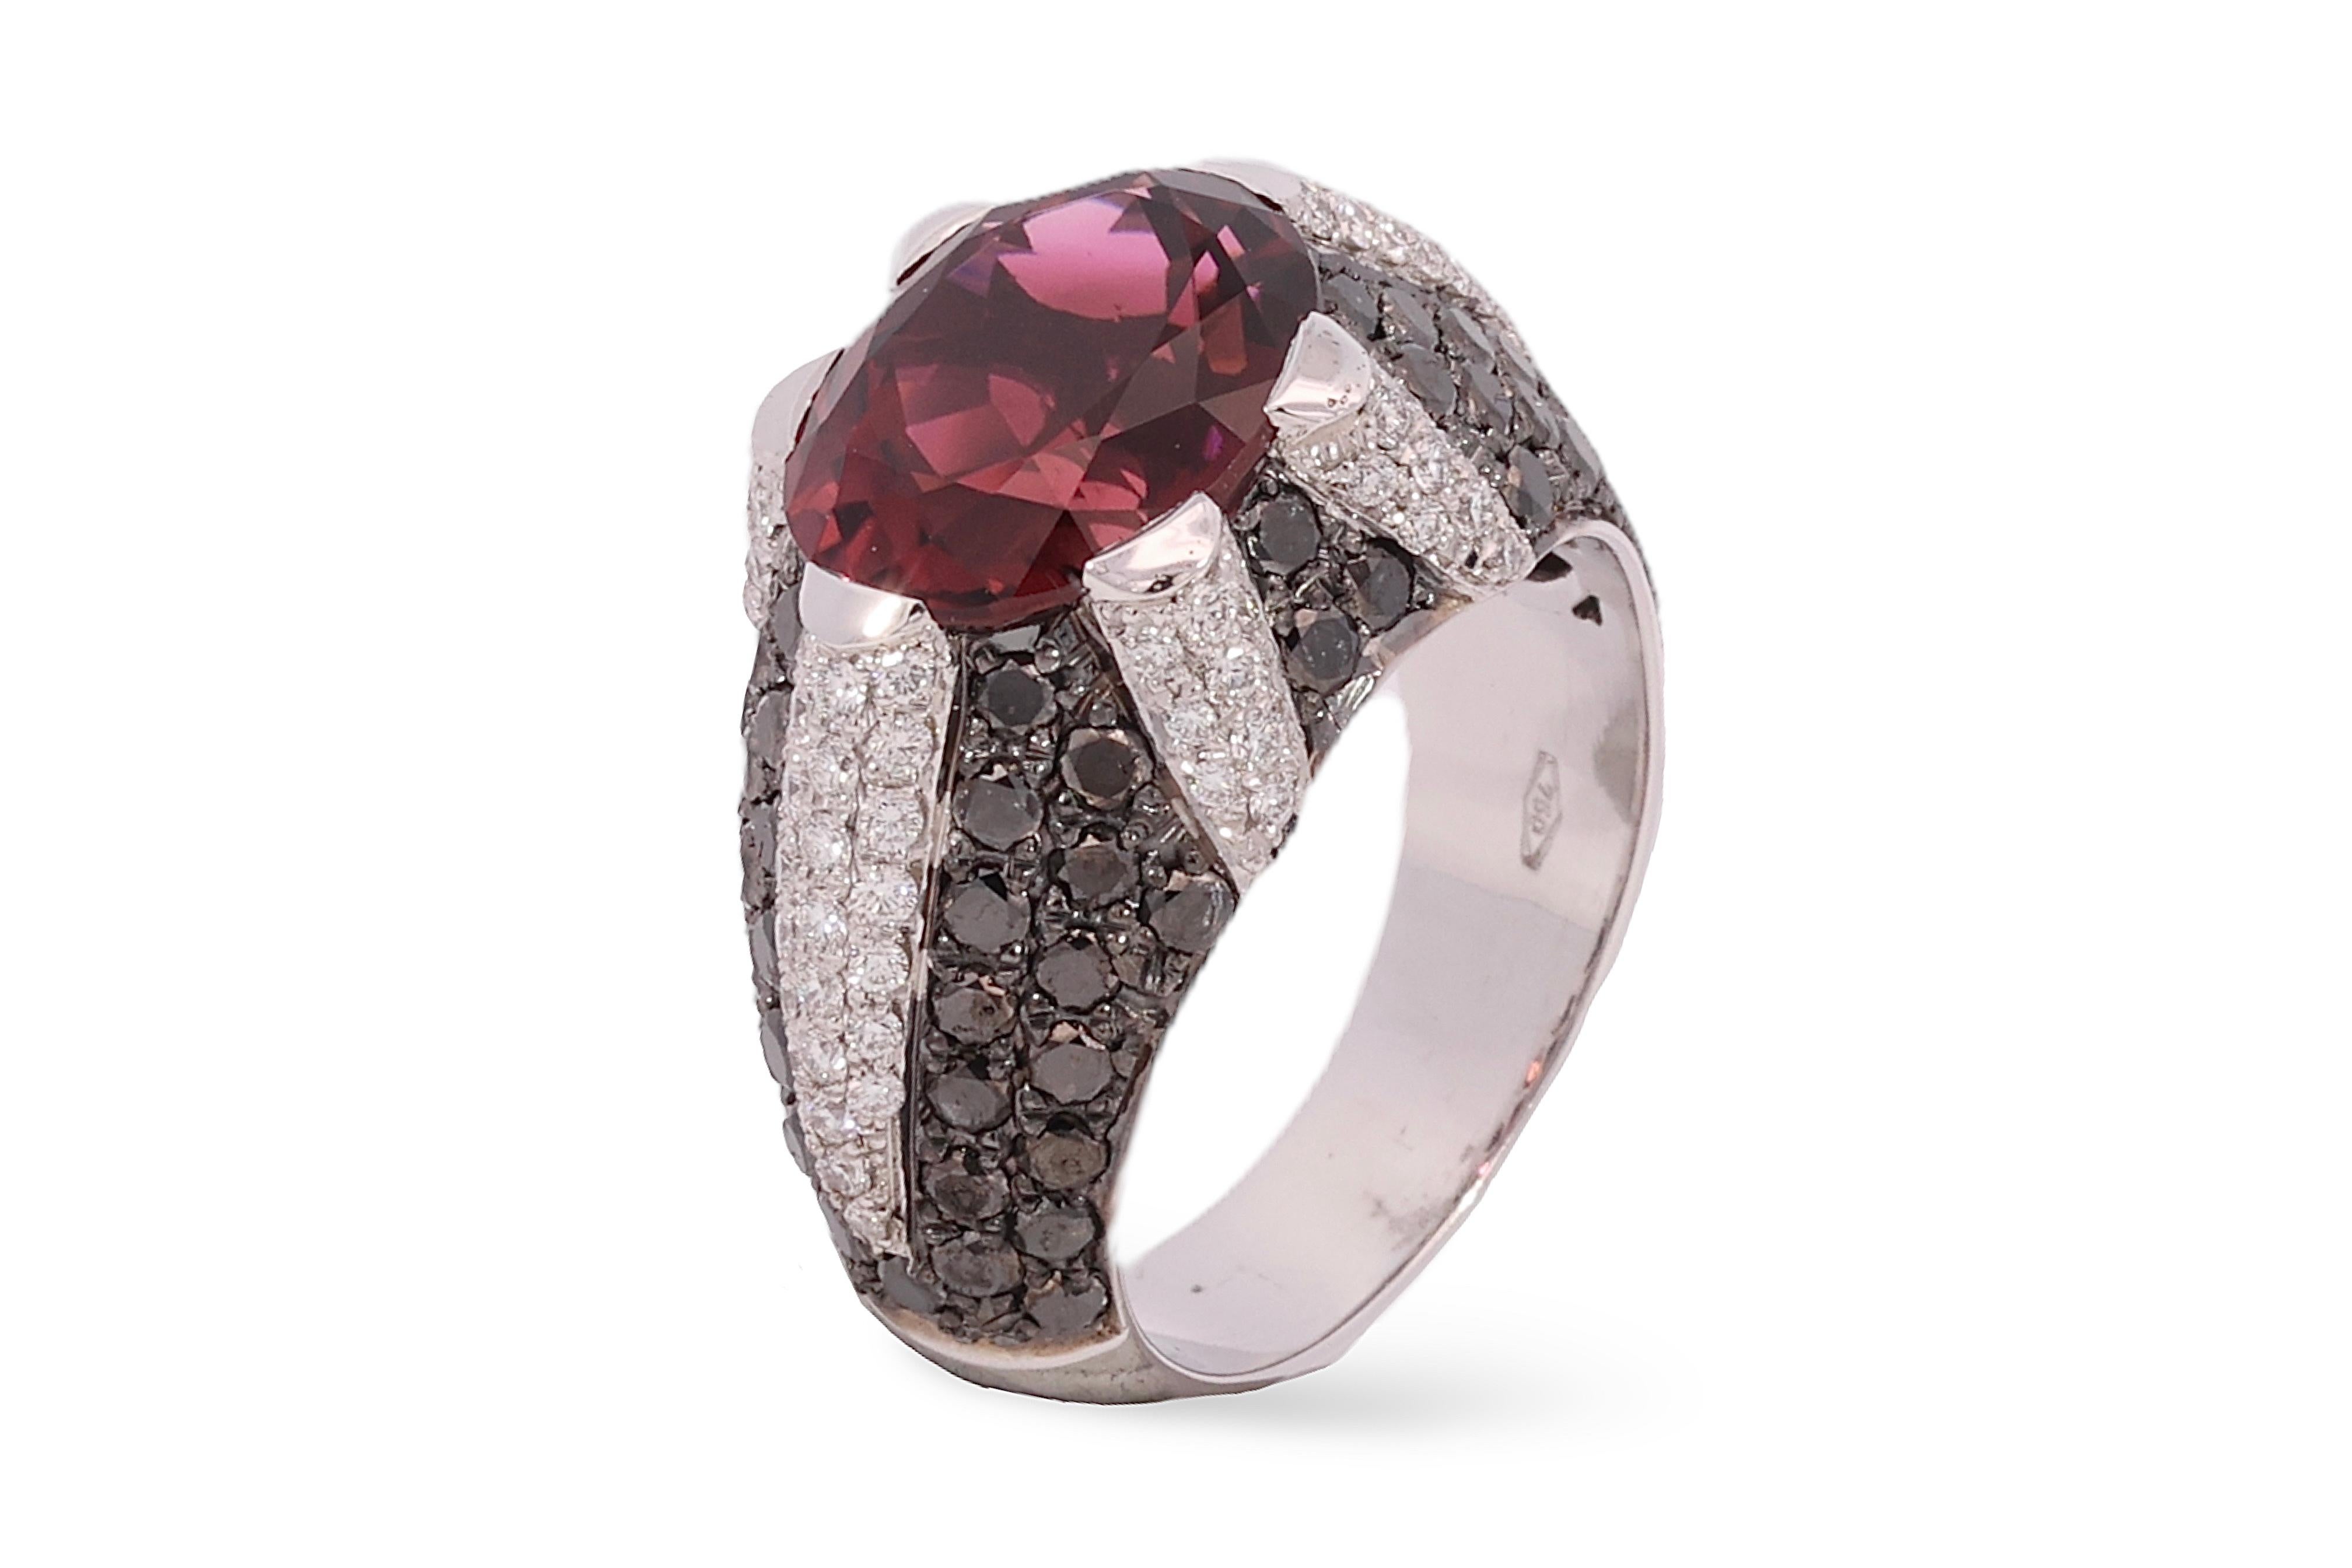 18kt White Gold Ring With 5.61ct Tourmaline and 2.75ct White and Black Diamonds 

Diamonds: Black diamonds together approx. 2.11 ct. White brilliant cut diamonds together approx. 0.64 ct.

Tourmaline: Beautiful tourmaline approx. 5.61 ct.

Material: